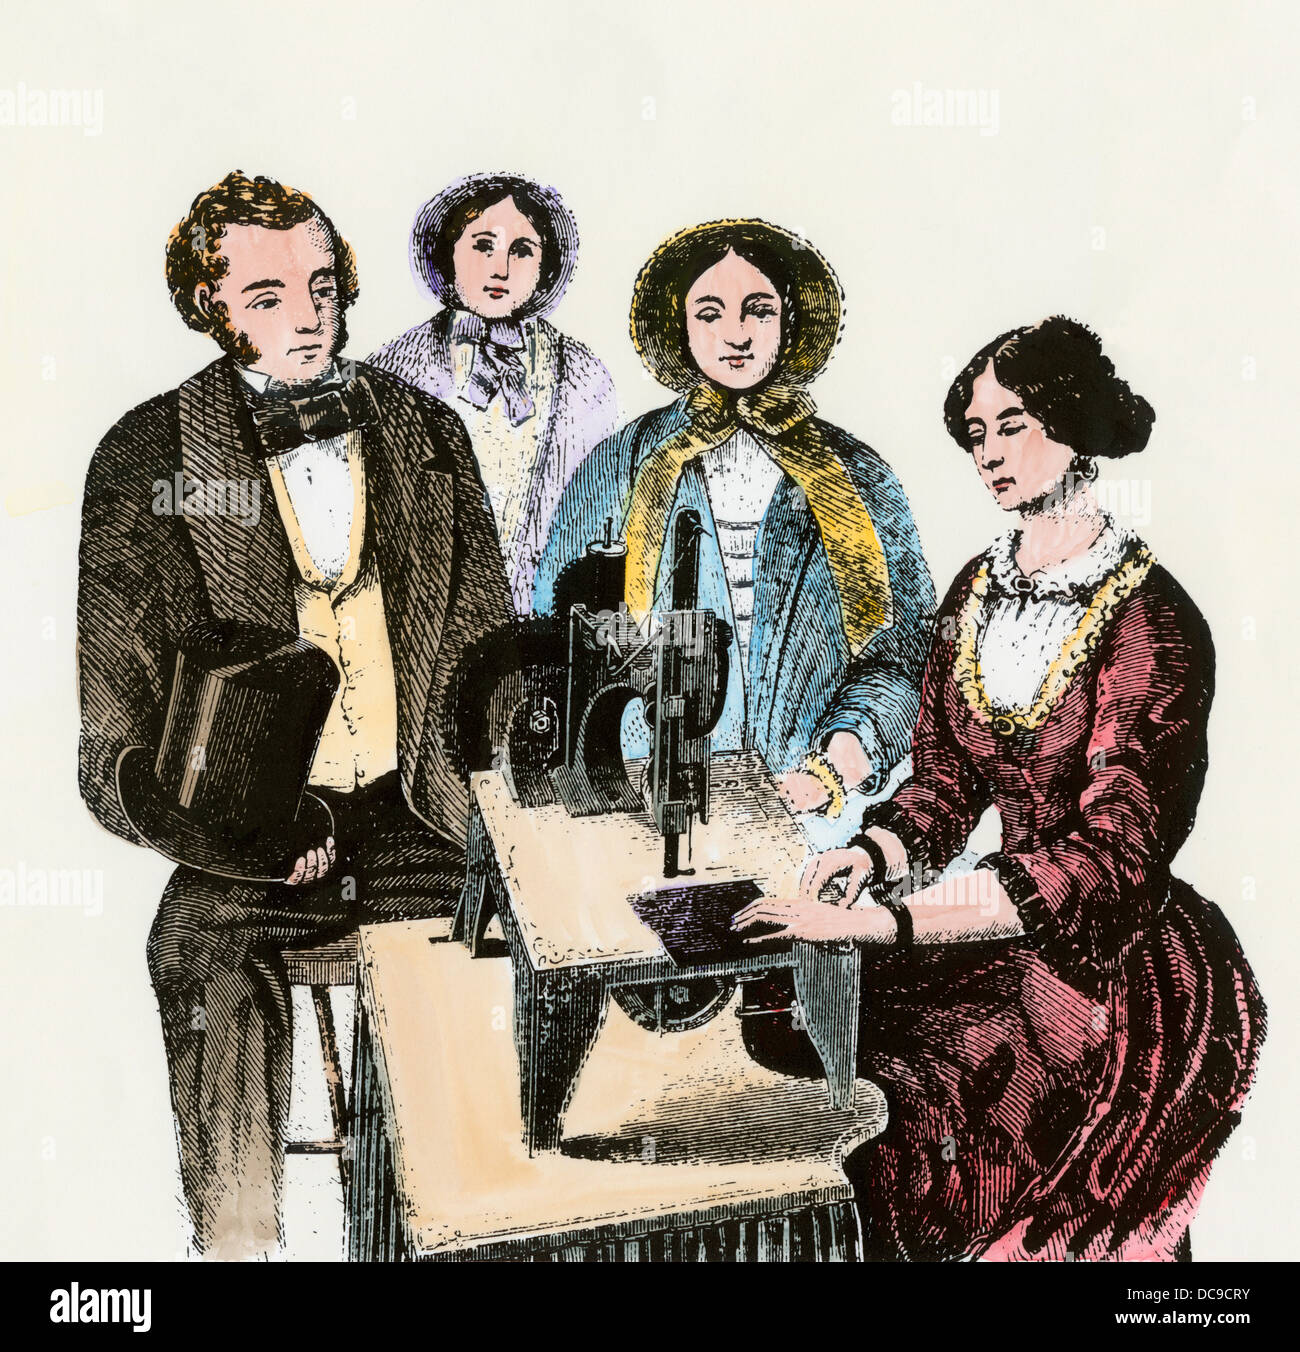 Woman demonstrating Singer's first sewing machine, 1850s. Hand-colored woodcut Stock Photo